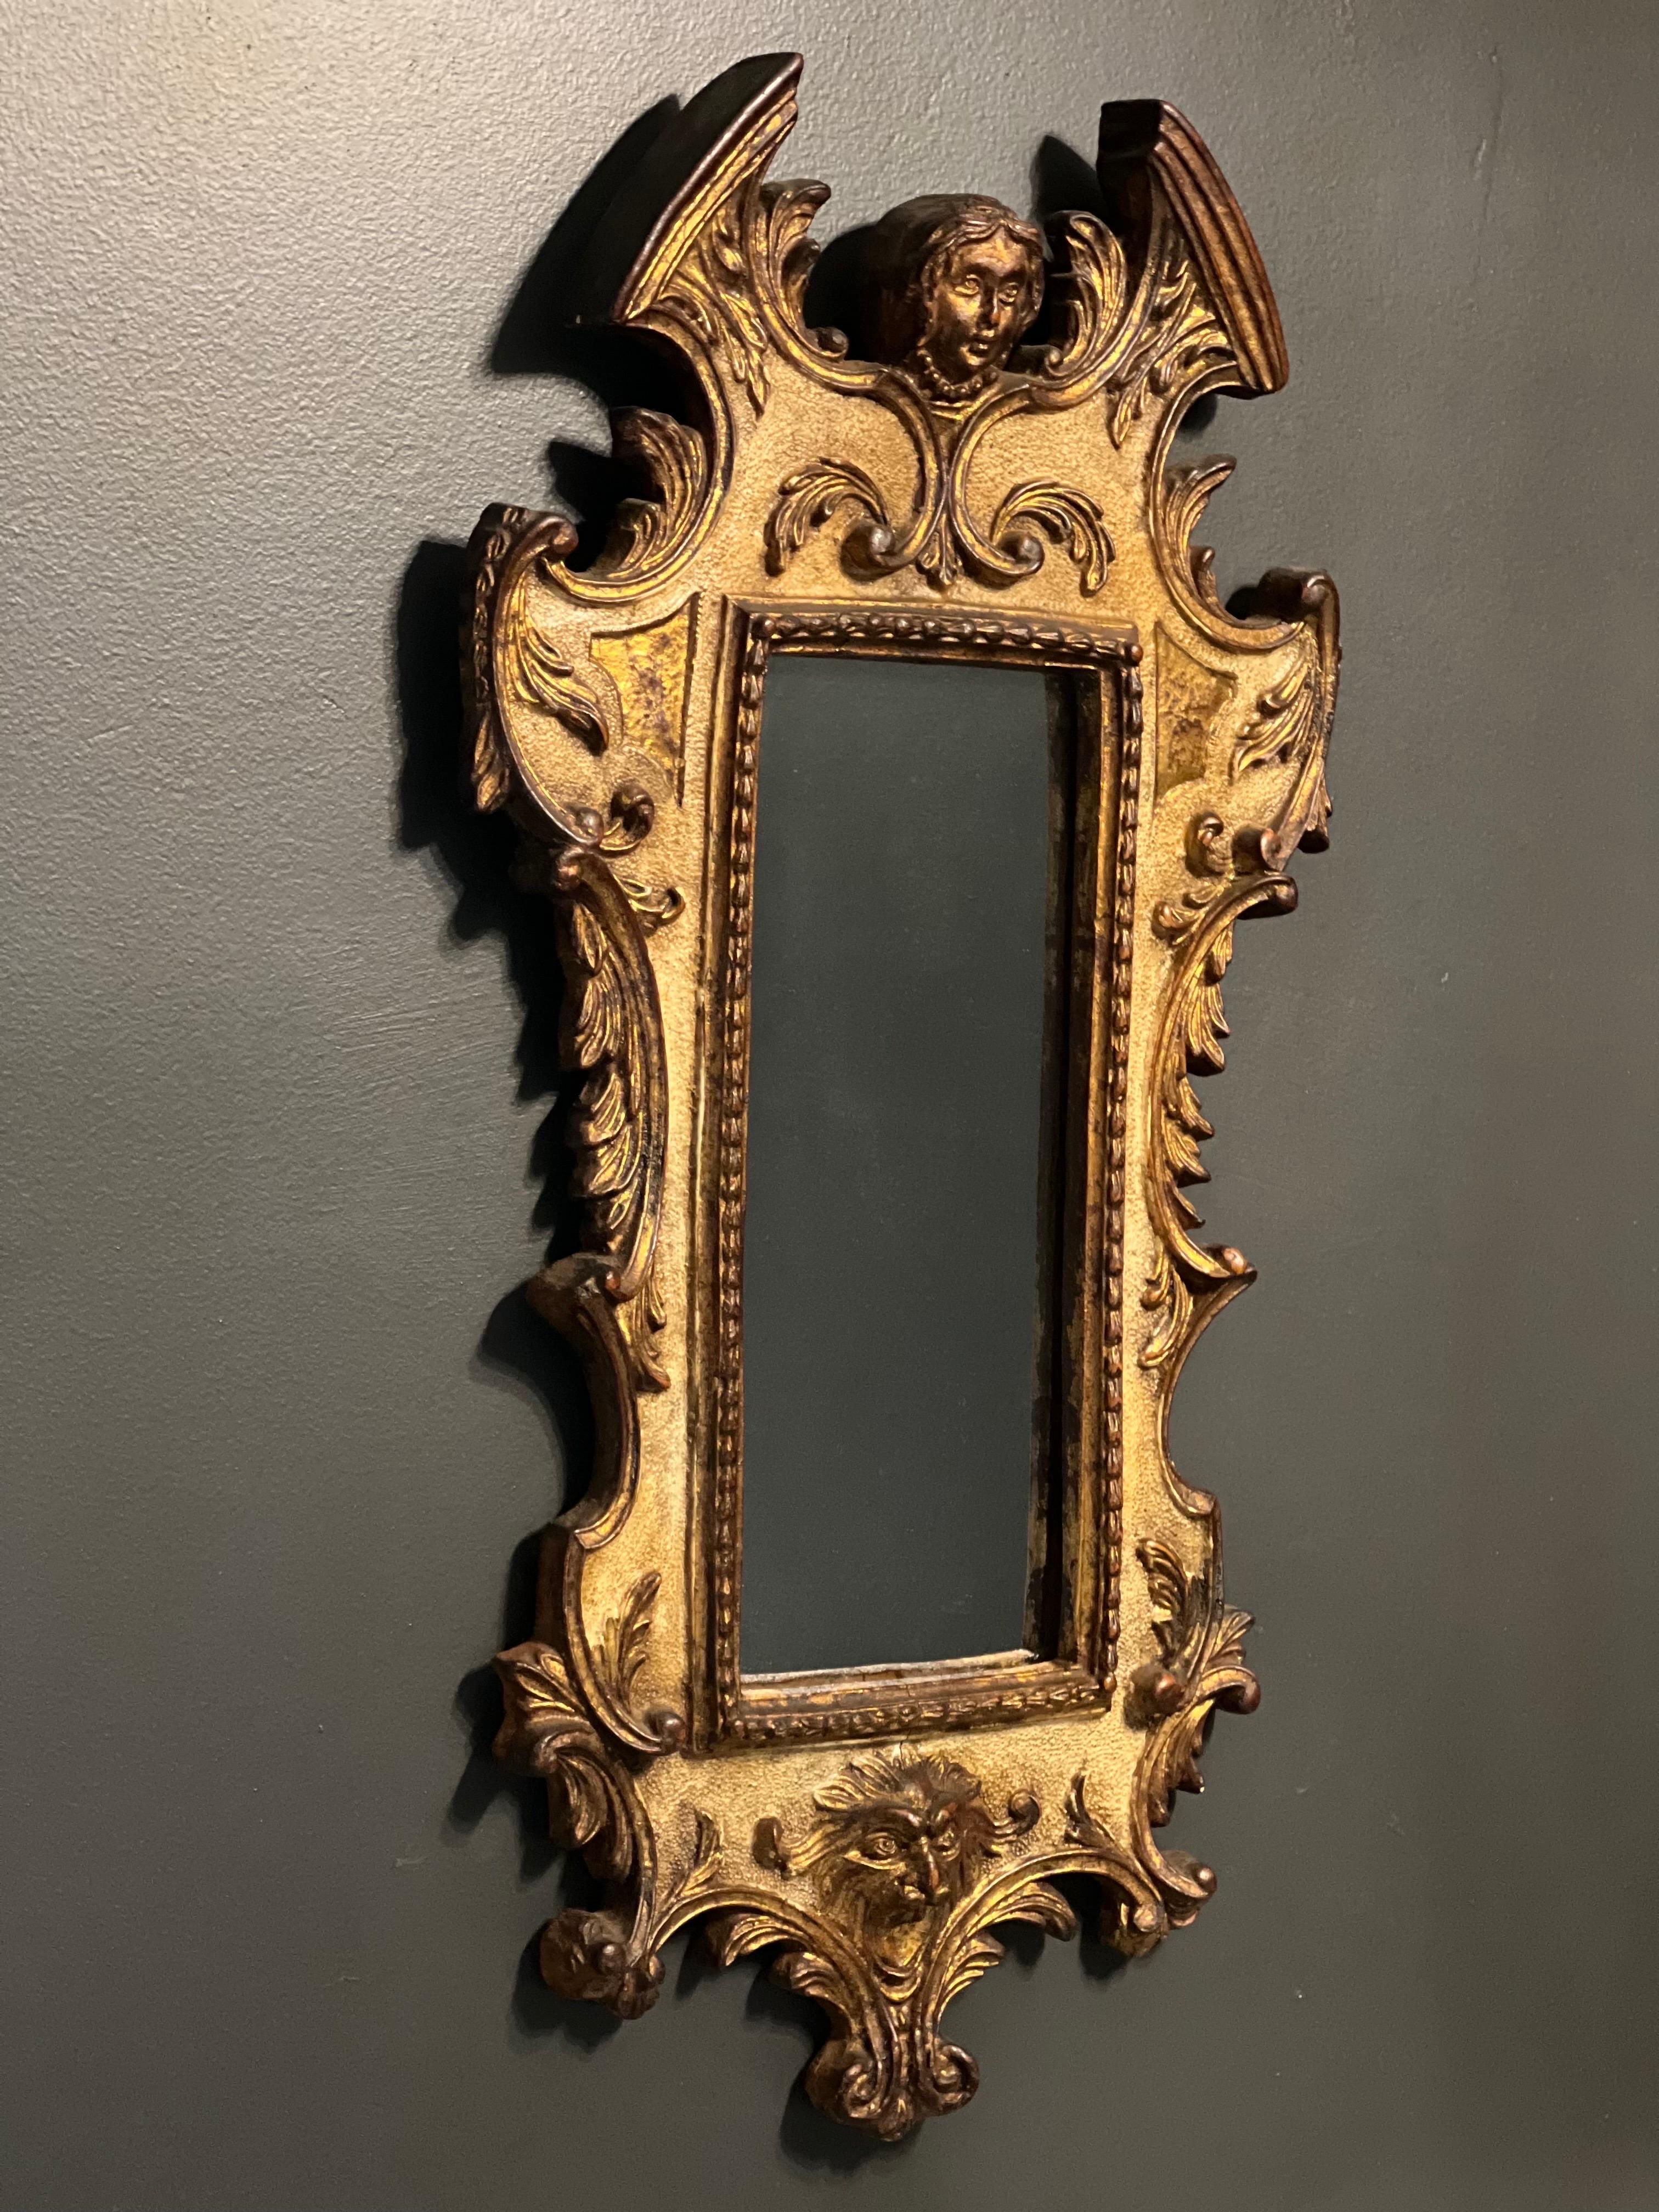 Exquisite antique Italian mirror, Italy, circa 1890's.

The mirror features a gilded wood and gesso frame with intricate carvings of a winged angel, a lion's head and elaborate scroll detail throughout. High quality mirror is in clean condition.